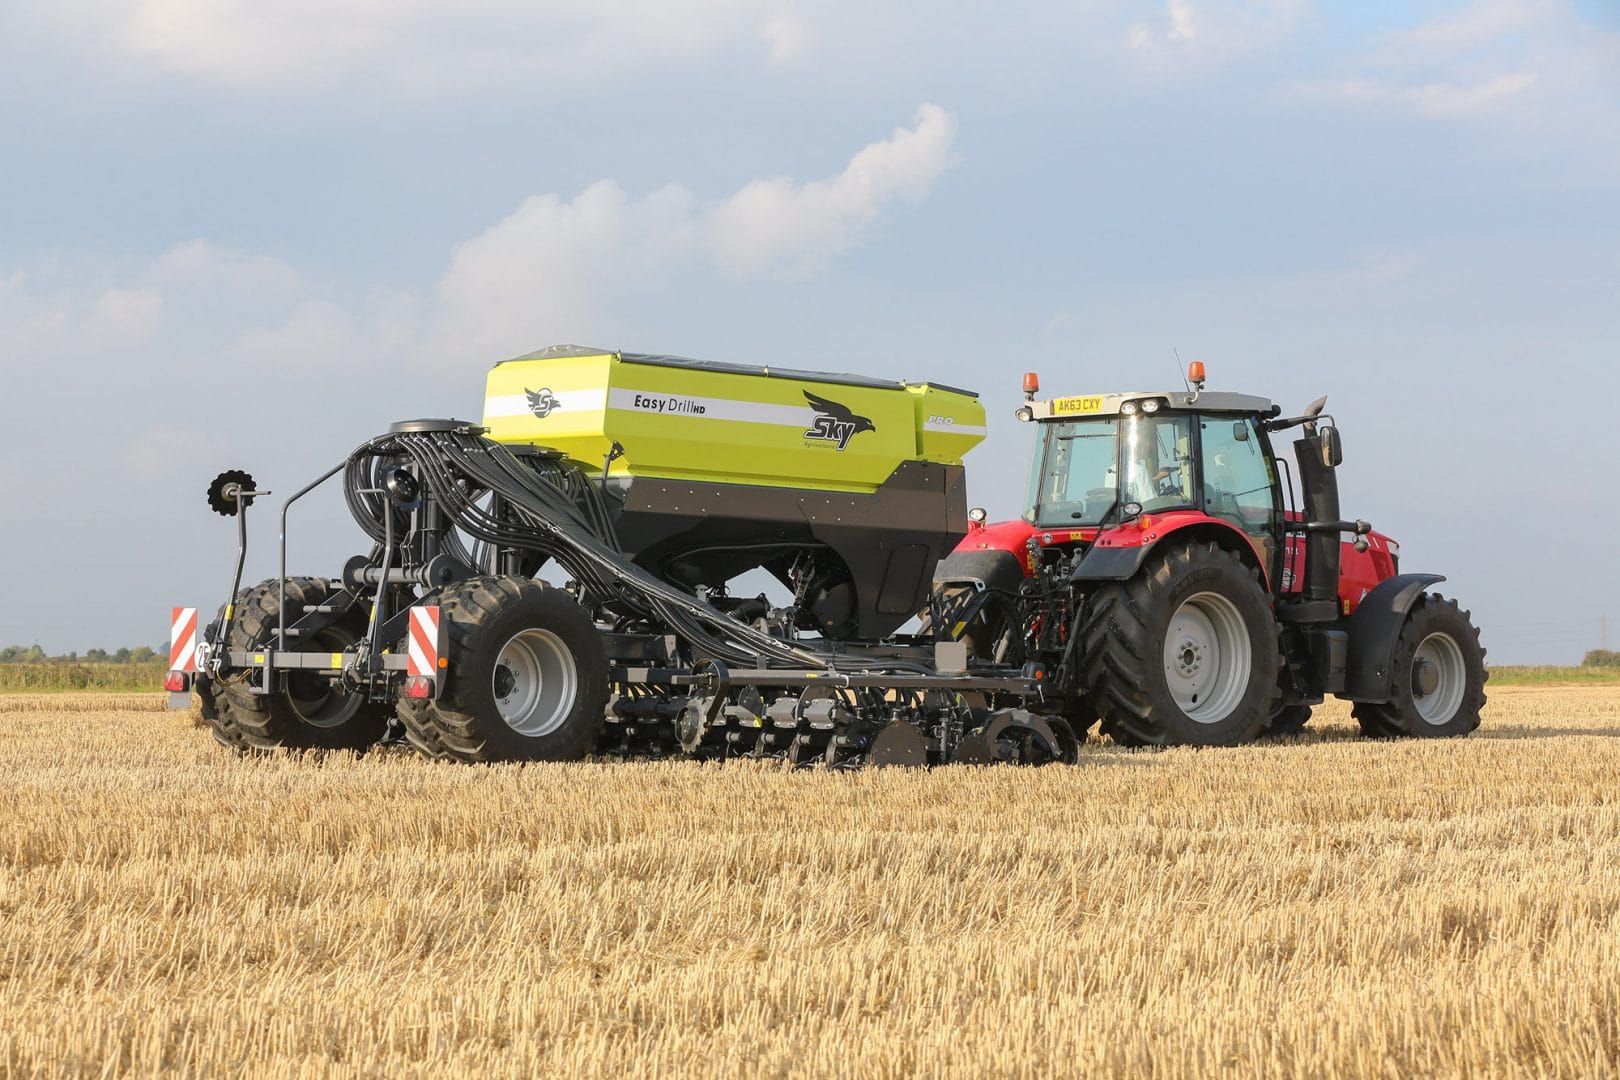 Sky Easy Drills are available from Thurlow Nunn Standen farm machinery dealer in East Anglia